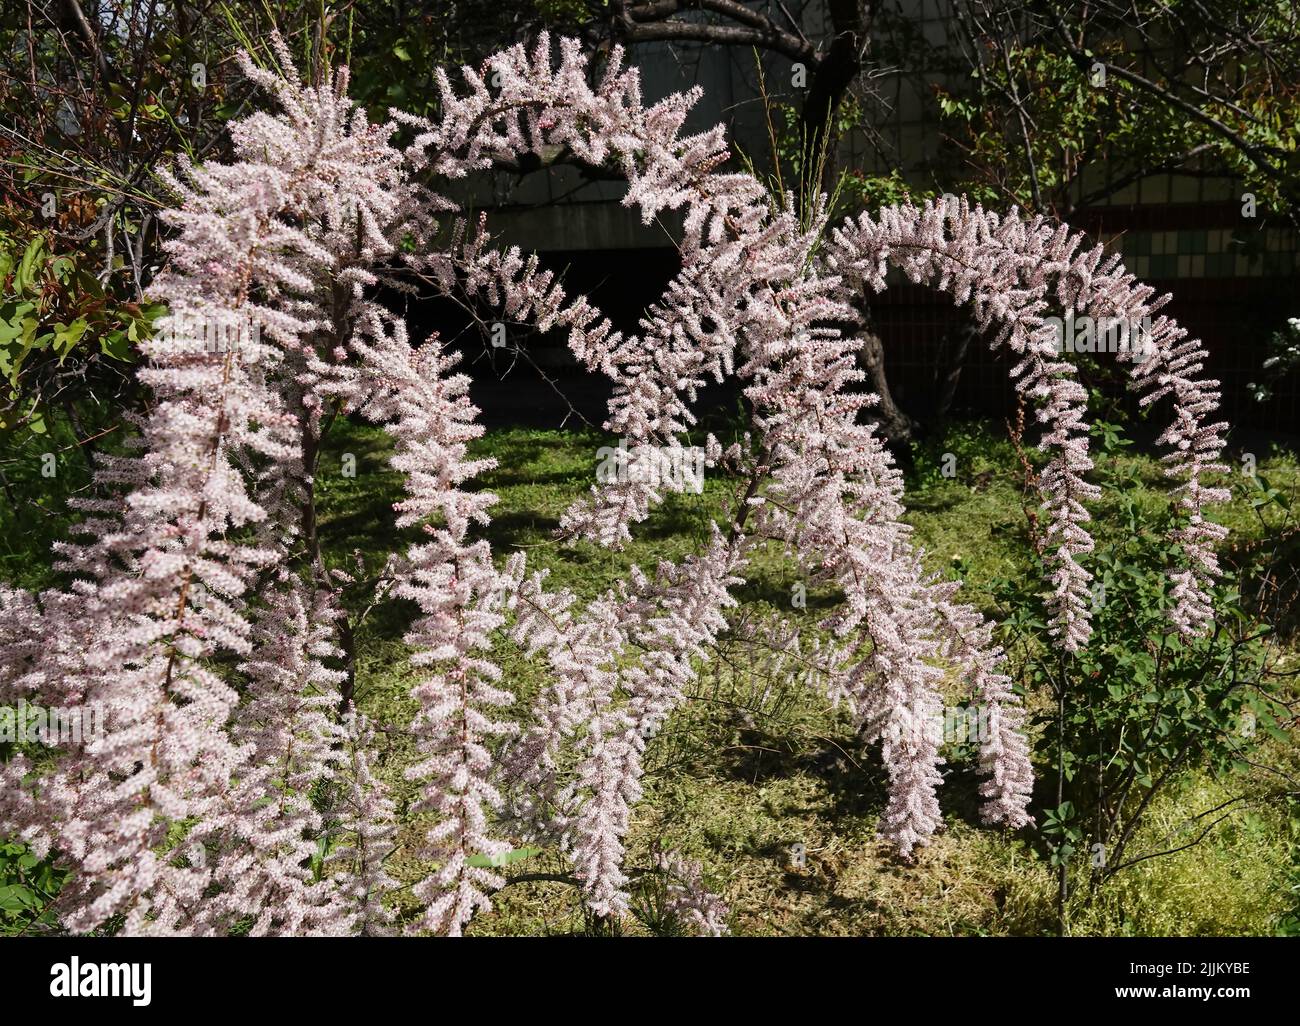 Flowers Grebenshik or Tamarix Gallica or French Tamarisk bush with small flowers blooming in spring Stock Photo